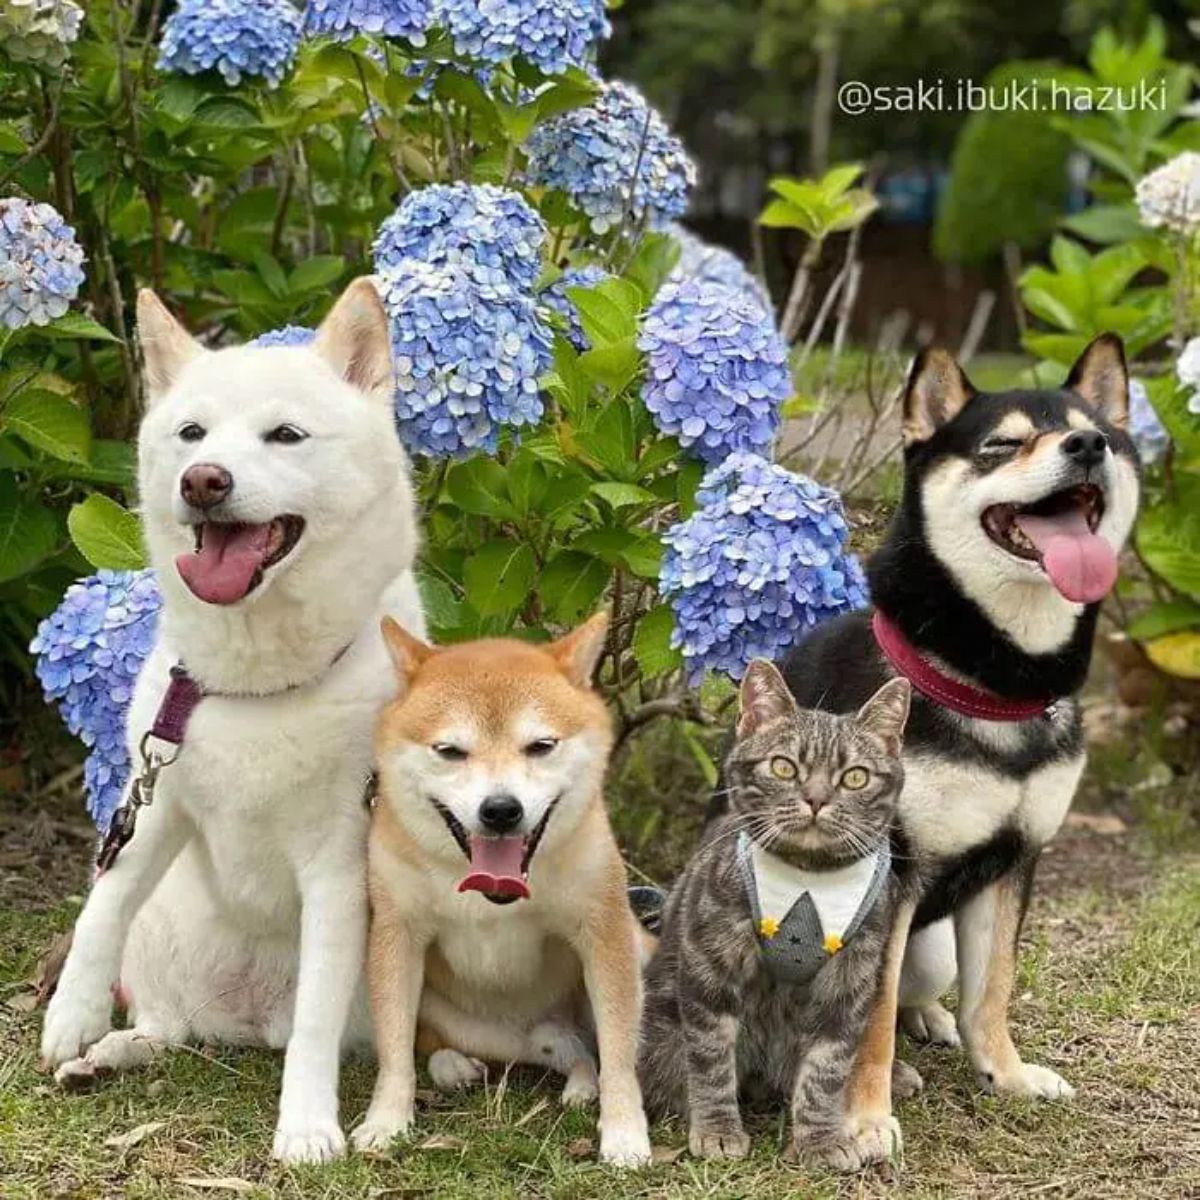 white brown and black shiba inus sitting on grass with a grey tabby between them